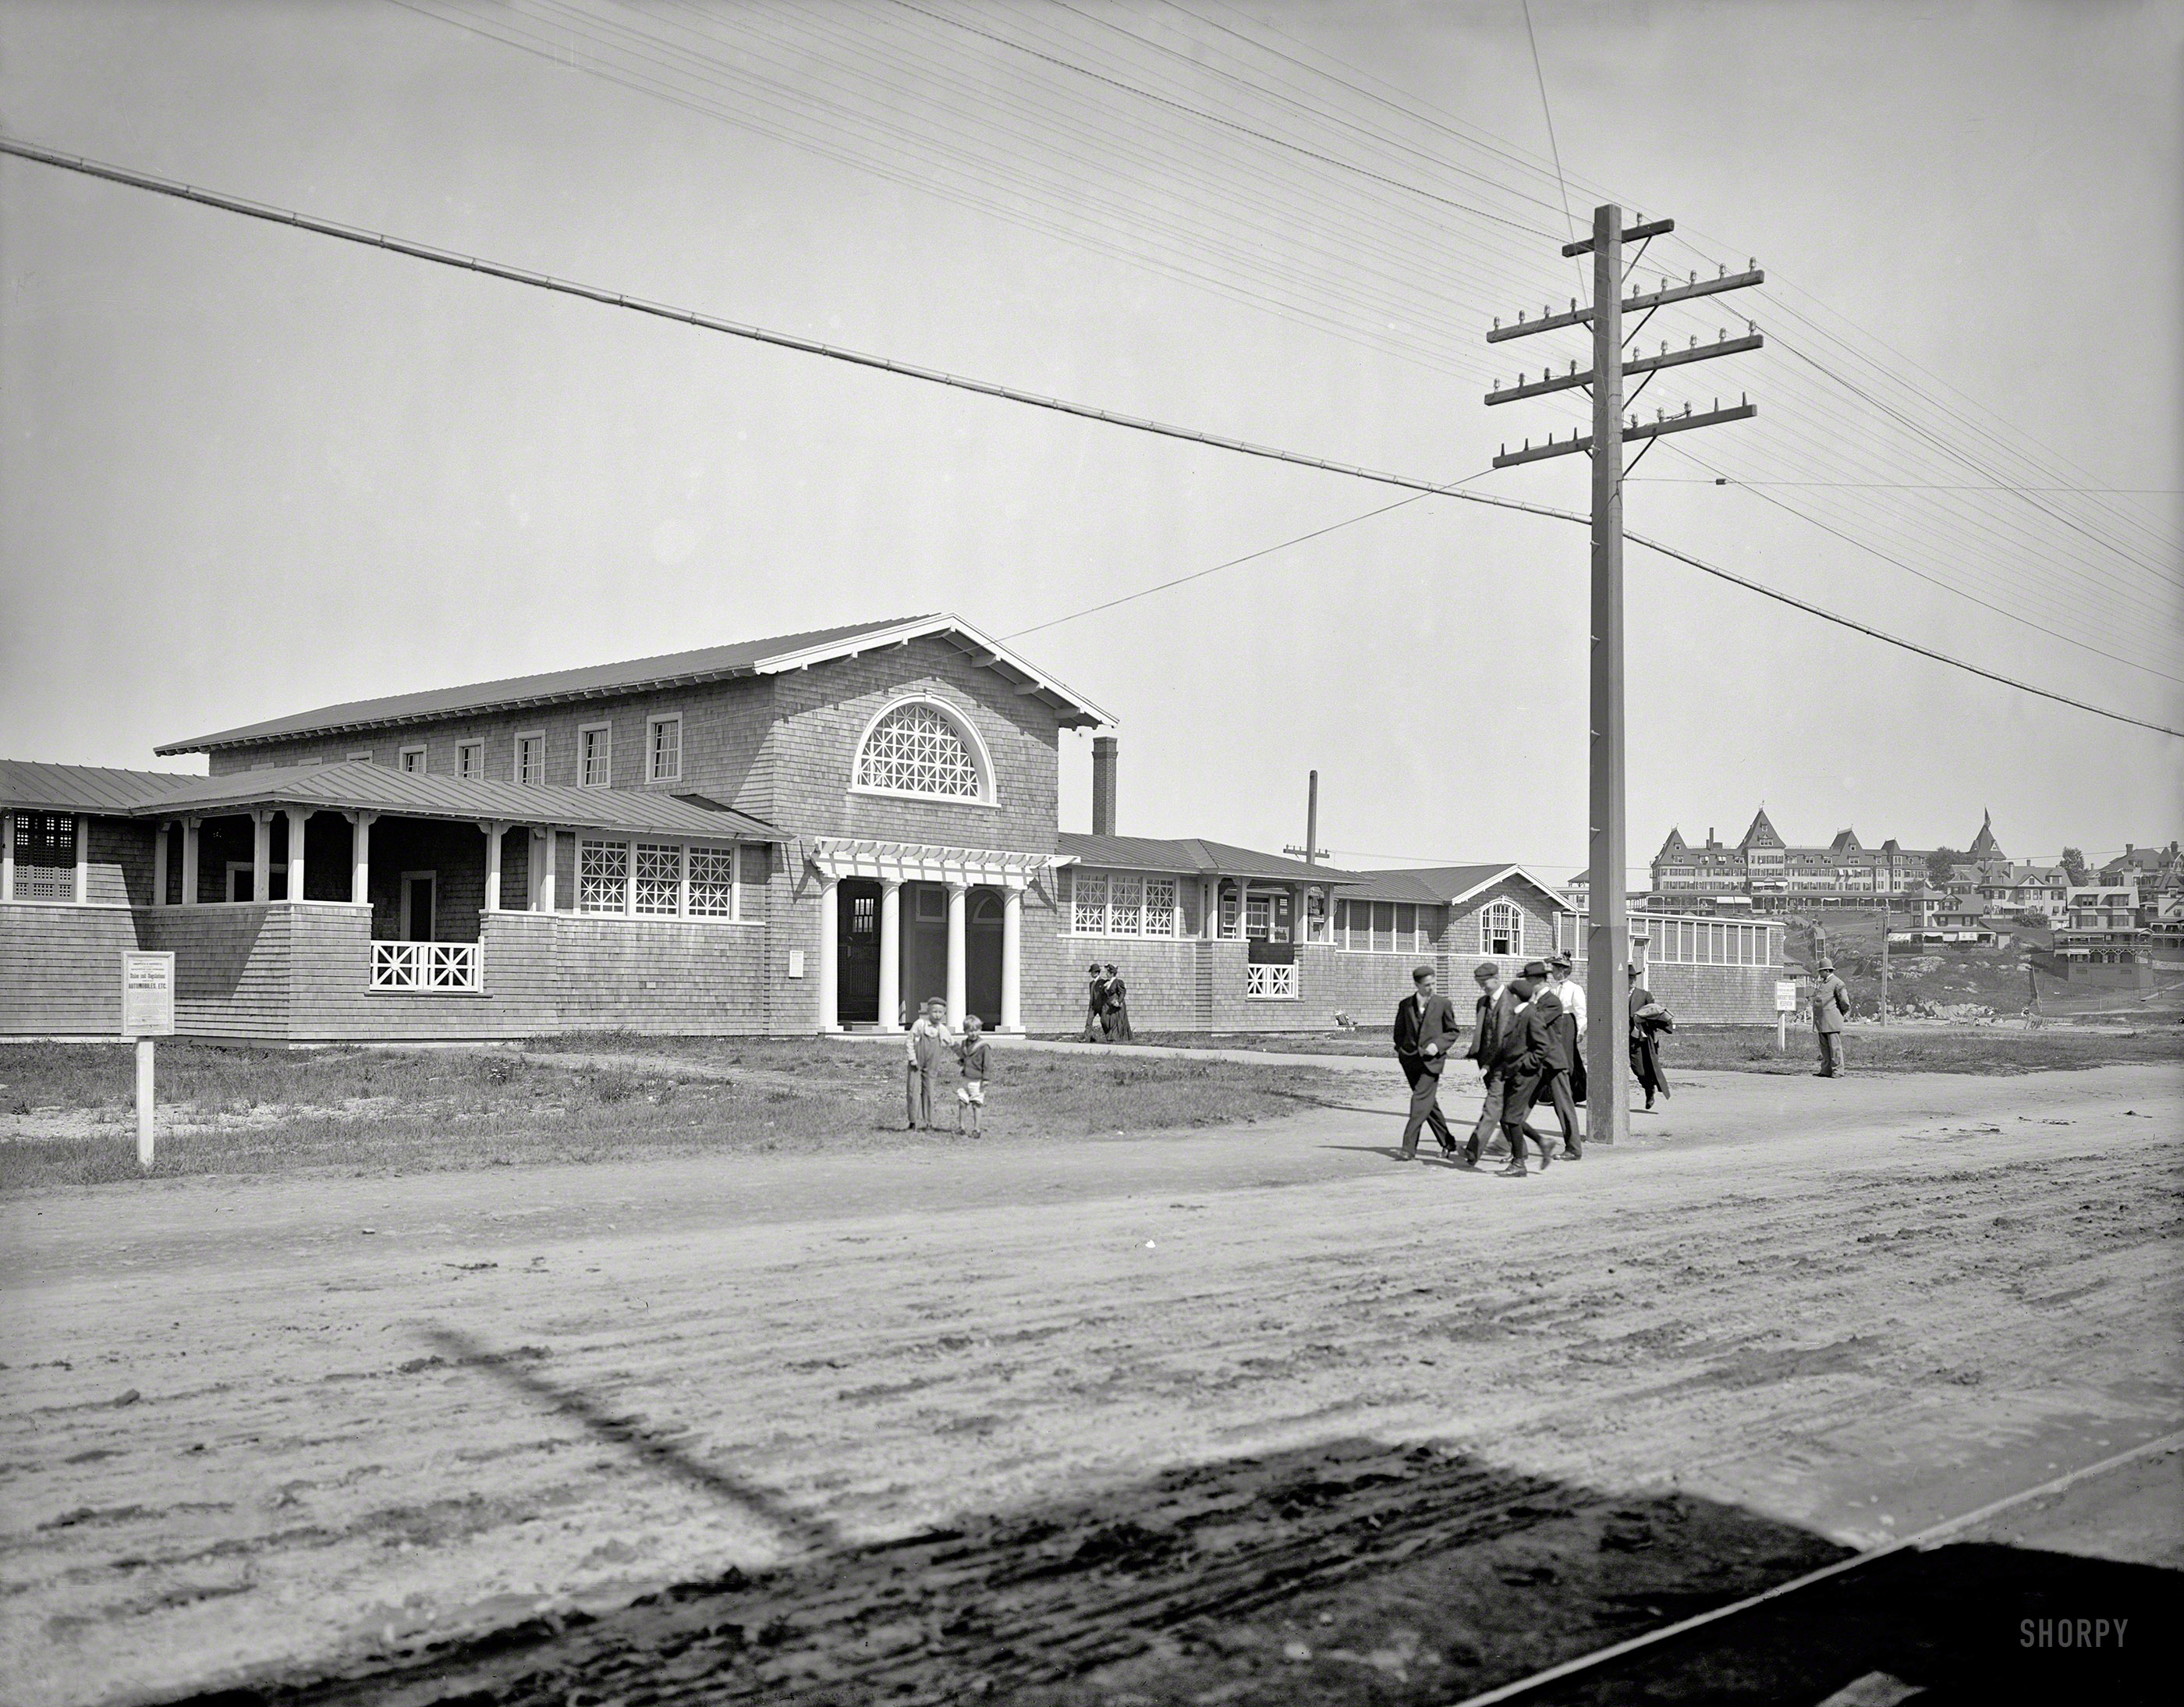 Circa 1905. "Bath house, Nantasket Beach, Mass." Note the "Rules and Regulations for Automobiles, Etc." posted at left. 8x10 glass negative. View full size.